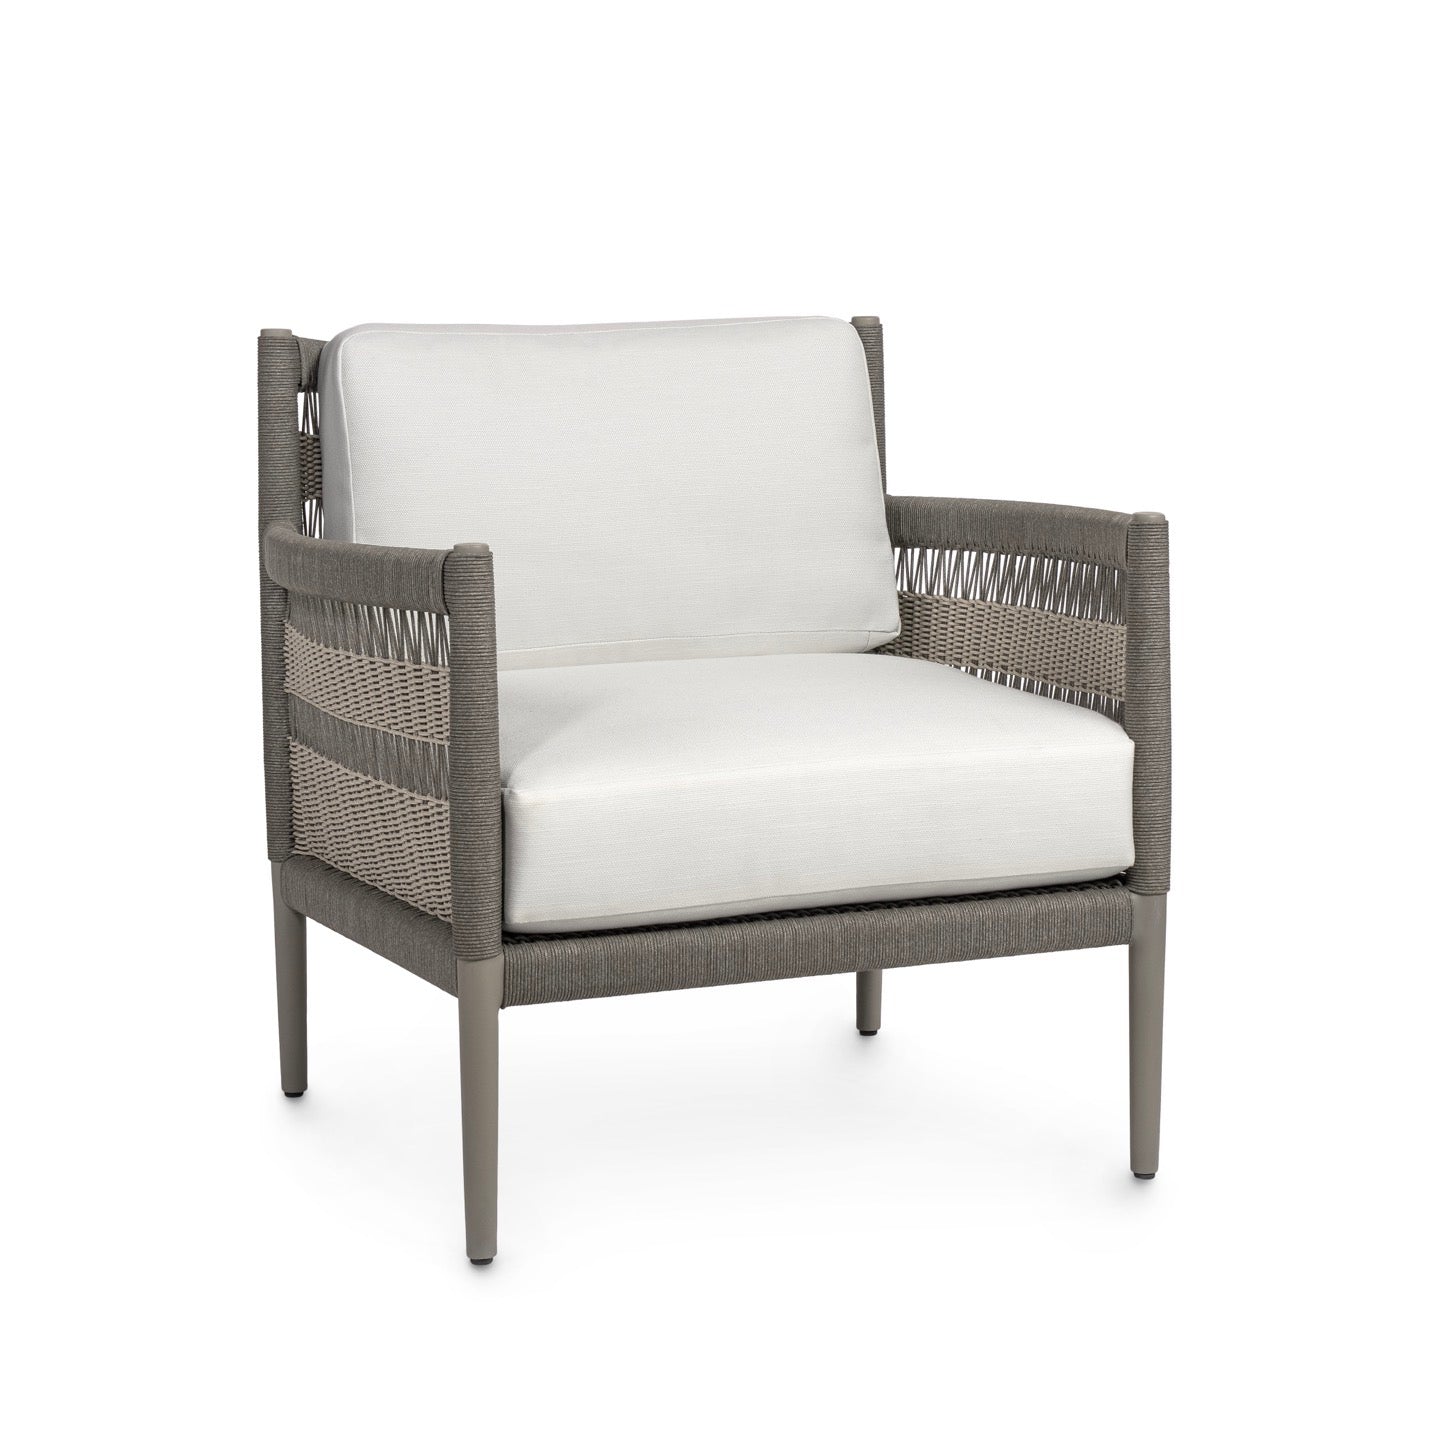 St. George Outdoor Lounge Chair